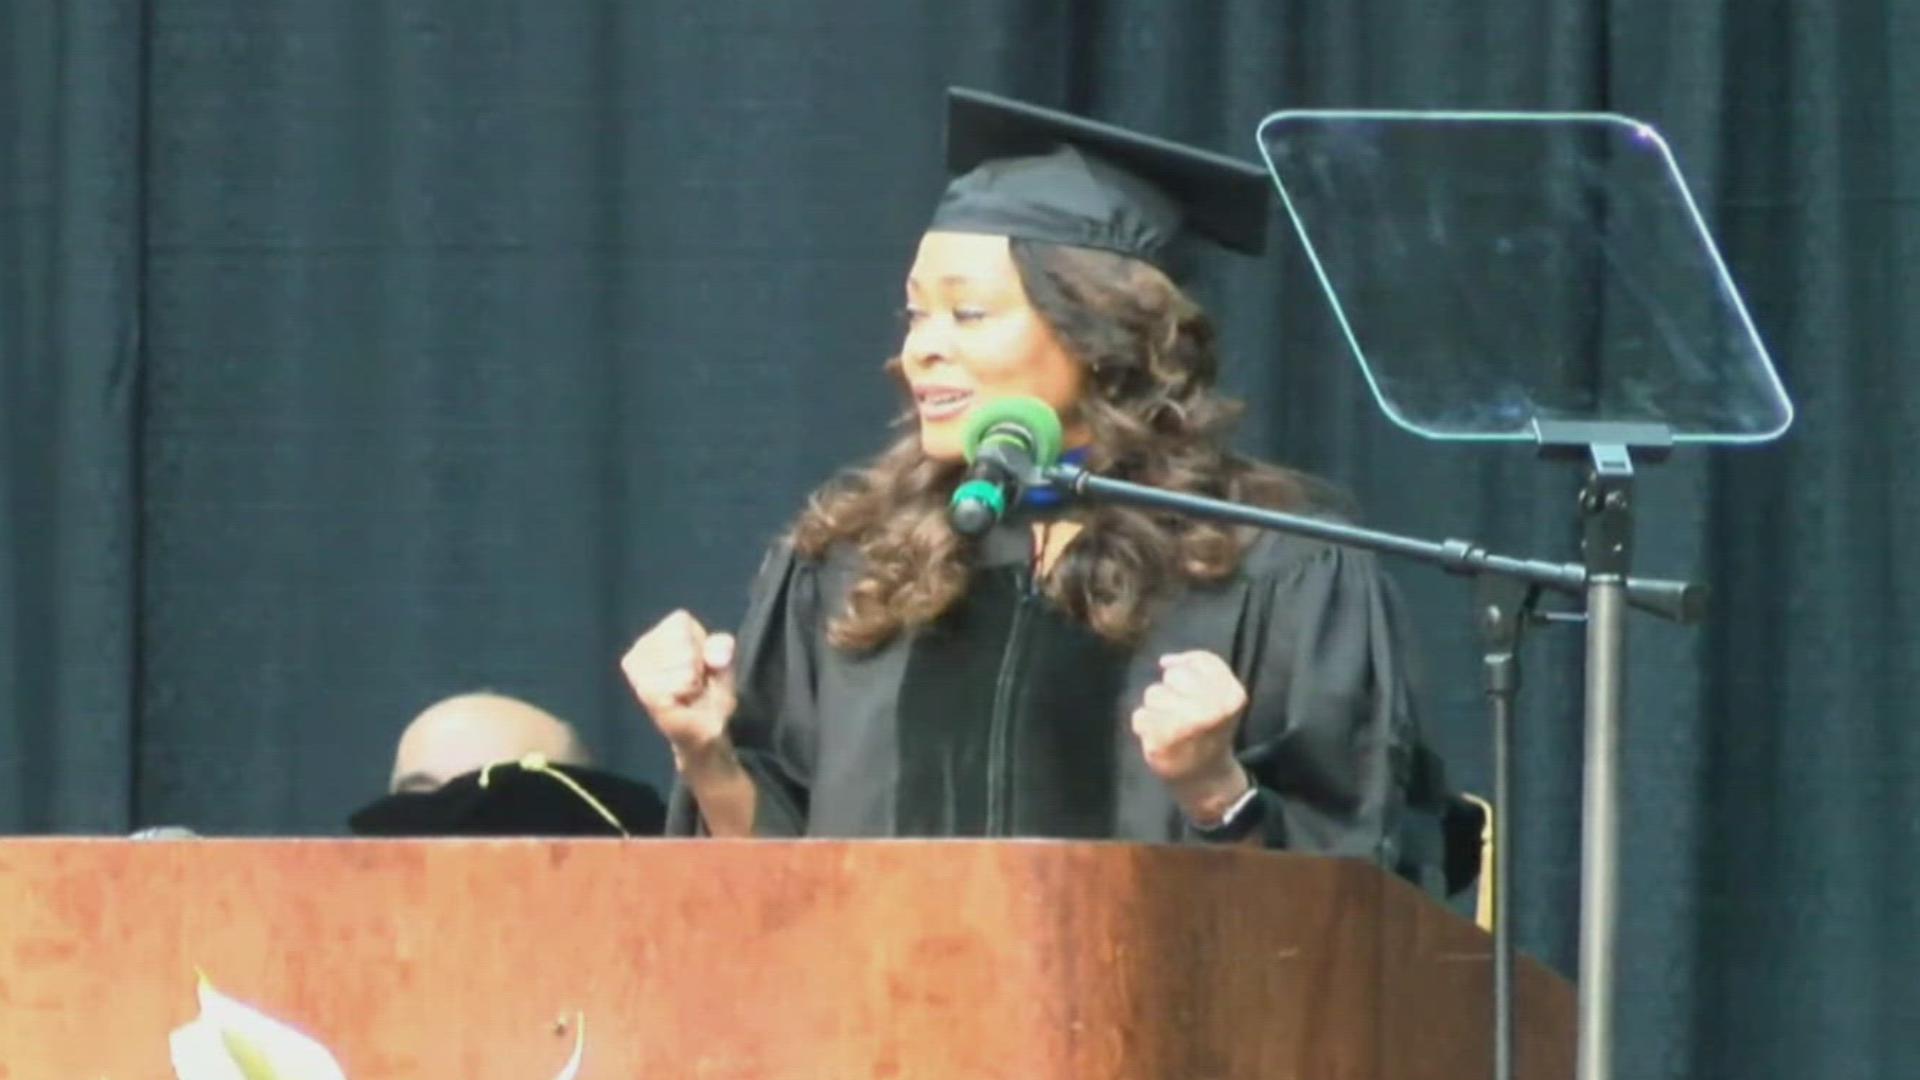 Robin Givens, known for her roles in Boomerang and Blankman, spoke to UAPB graduates about overcoming adversity during the Spring 2024 ceremony.